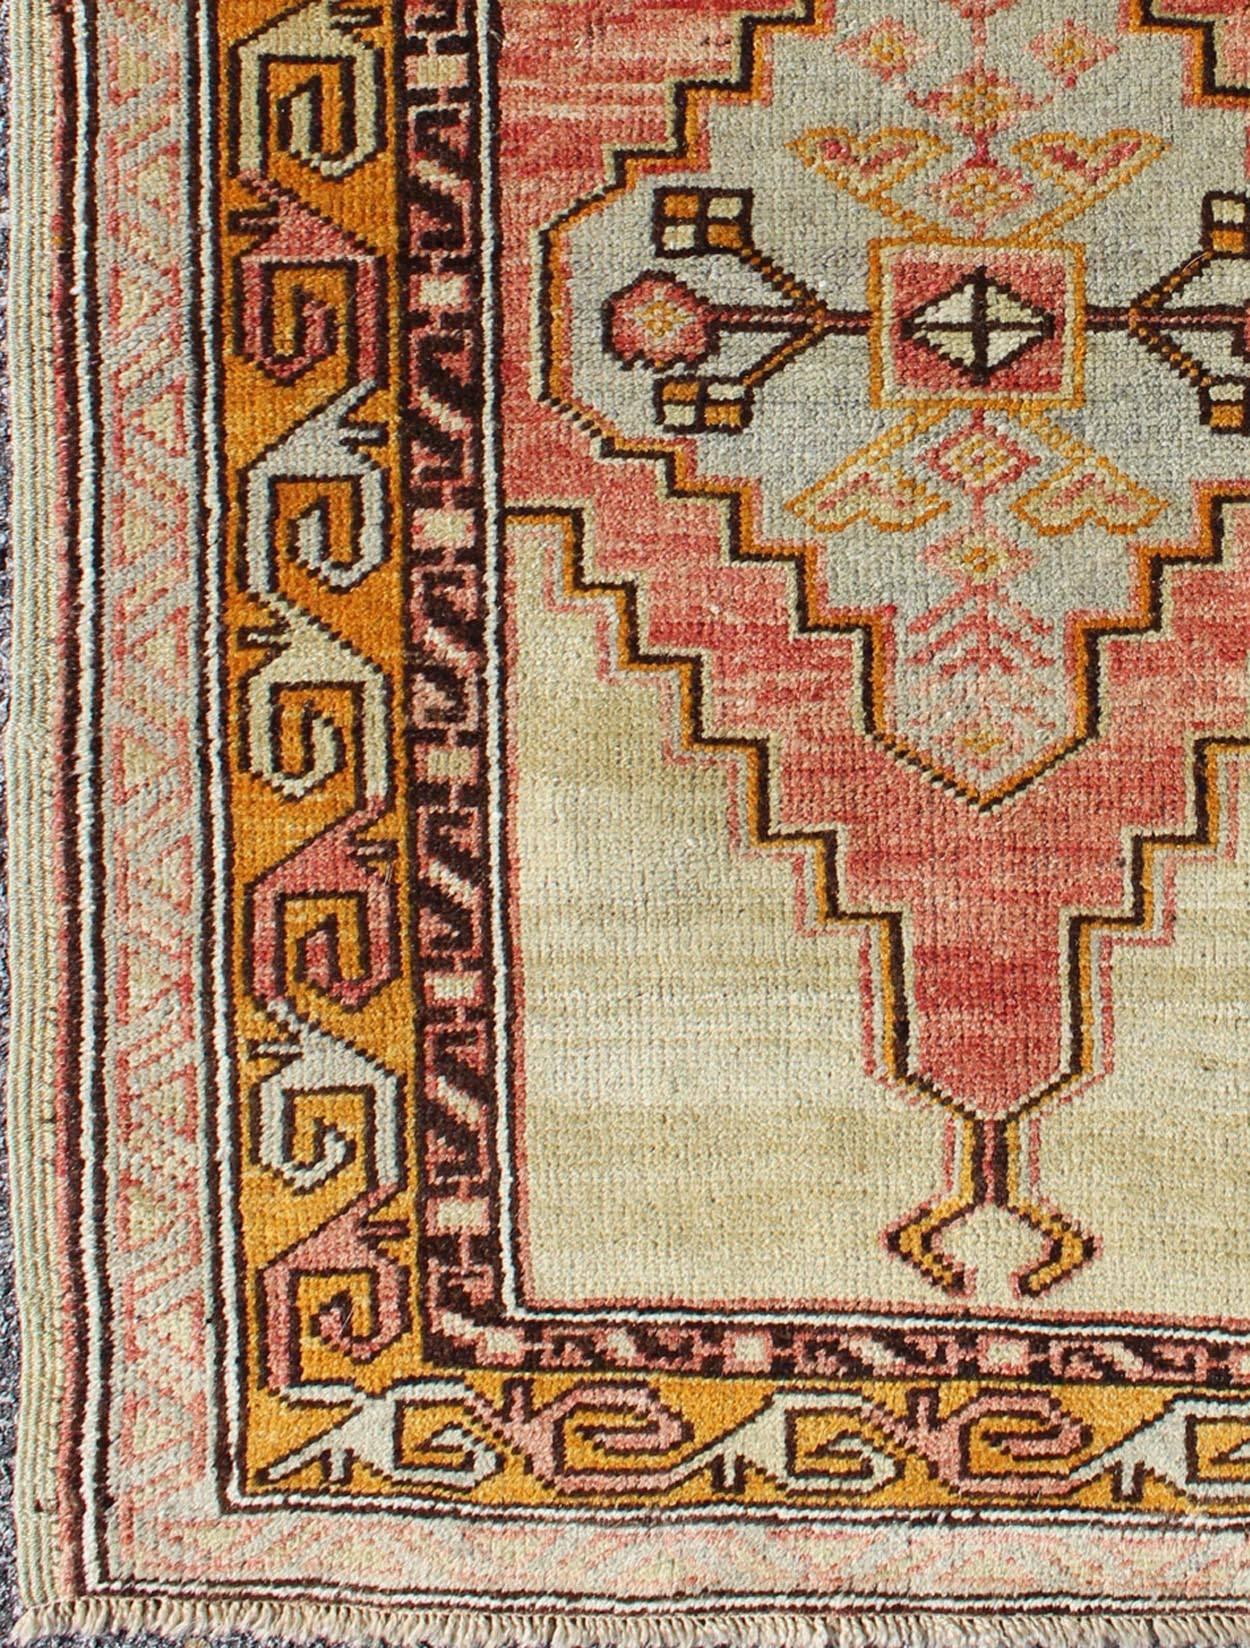 Colorful stylized antique Turkish Oushak rug with layered tribal medallion, rug en-112395, country of origin / type: Turkey / Oushak, circa 1920

This antique Turkish Oushak rug features an intricately beautiful design with a tribal aesthetic. The